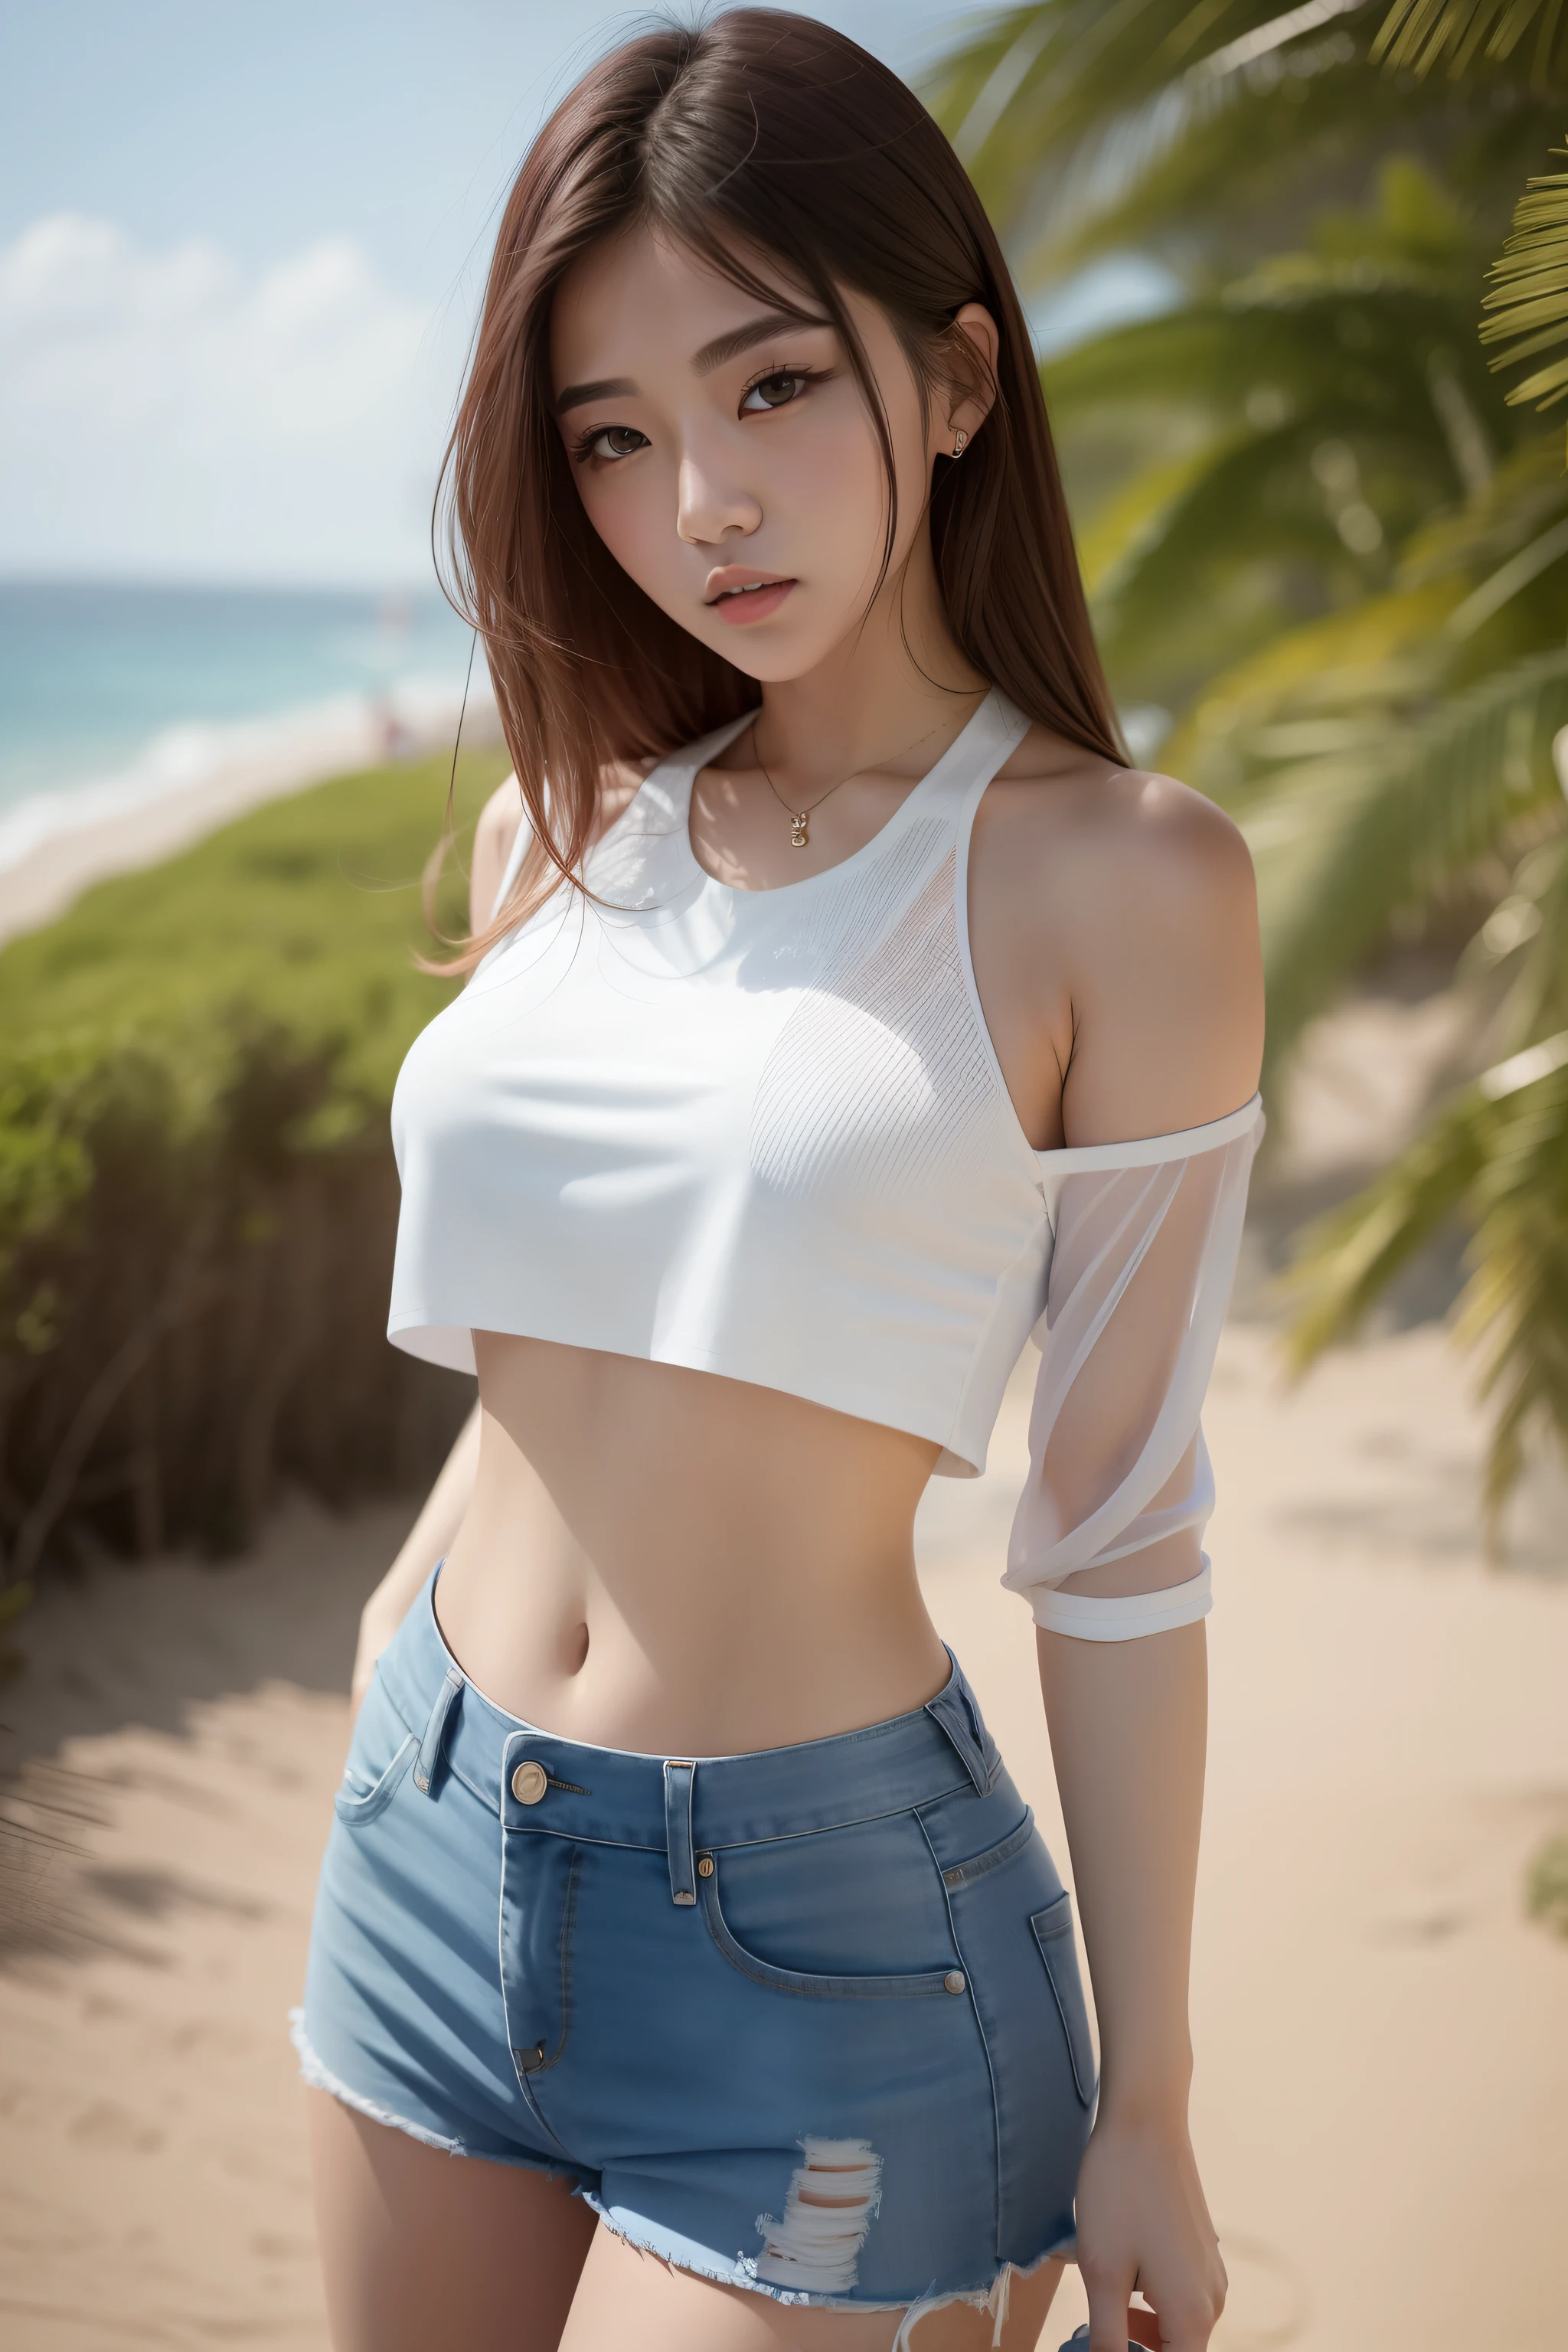 A woman in a white blouse and blue shorts by the sea，On the seaside, there are waves, sandy beaches, gorgeous young Korean women, 2 4 year old female model, Korean girl, korean women's fashion model, beautiful Korean women, photo of slim girl model, Beautiful young Korean woman, wearing sexy cropped top, with ripped crop t - shirt, wearing tight simple clothes, white halter top